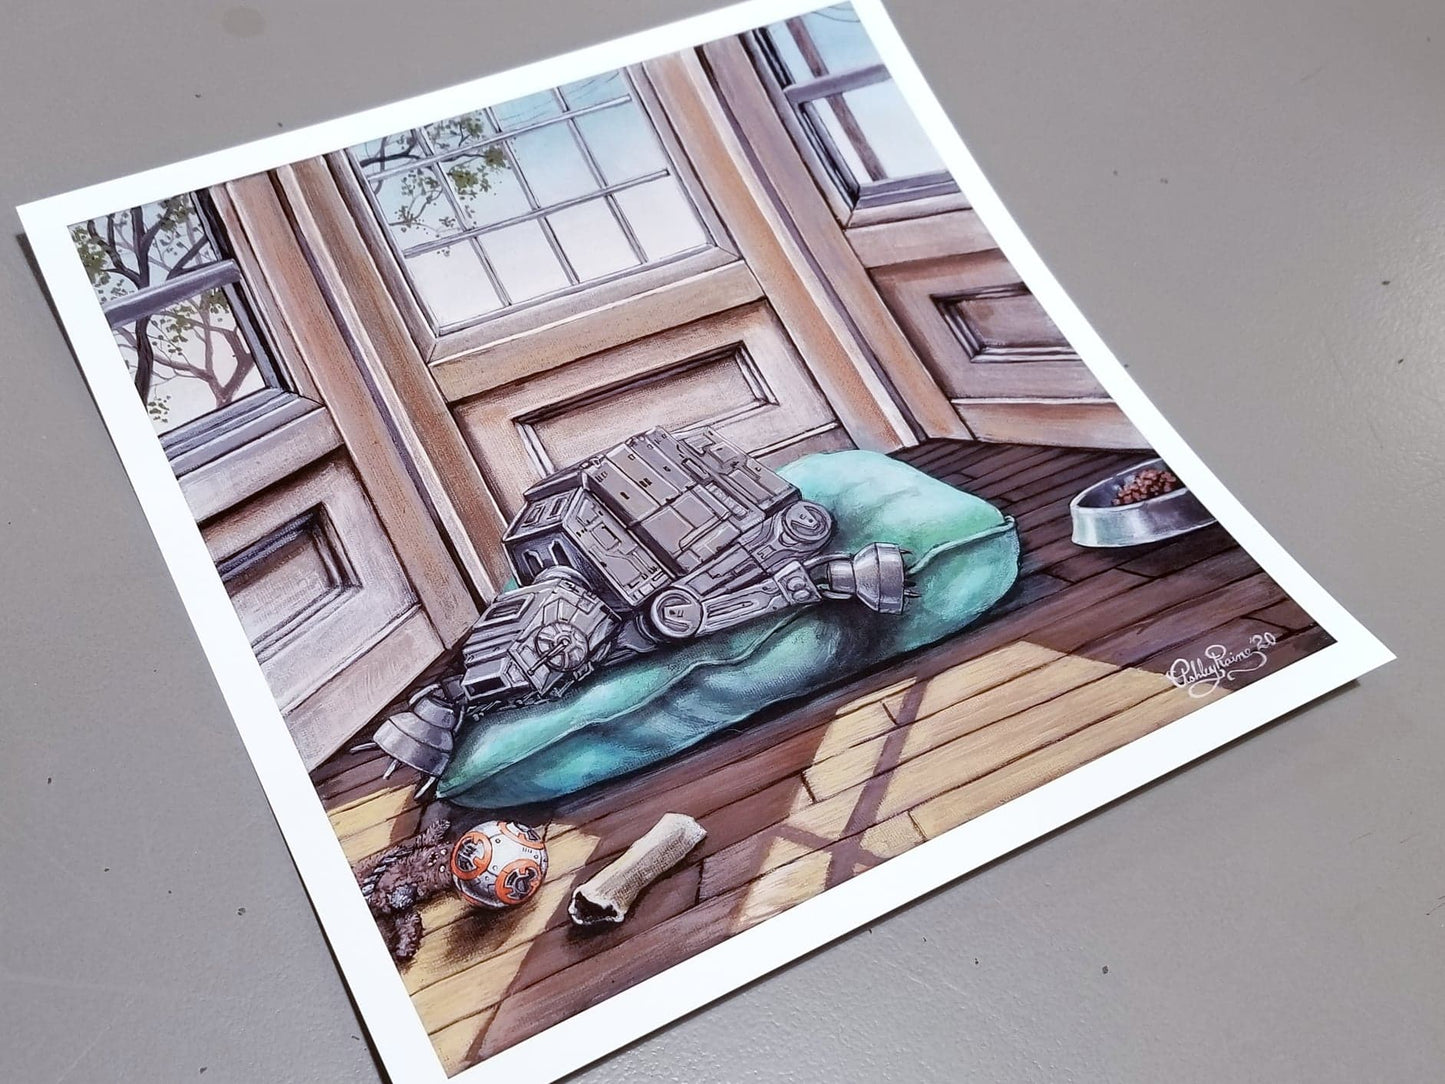 Load image into Gallery viewer, &amp;quot;Imperial Pupper&amp;quot; Star Wars Parody Art Print by Ashley Raine  Who&amp;#39;s a good AT-AT? This boy is, and he&amp;#39;s taking a well deserved puppy nap by the window! This Star Wars parody art is perfect for Imperial War Machine lovers and Sith Sympathizers of course, but also for any Star Wars fan who loves their fur-babies!    Details to Enjoy: Pup has a Wookiee toy with a torn-off arm, a bone, a comfy bed, and a well loved BB-8 chewy toy for only the best of good boys.
